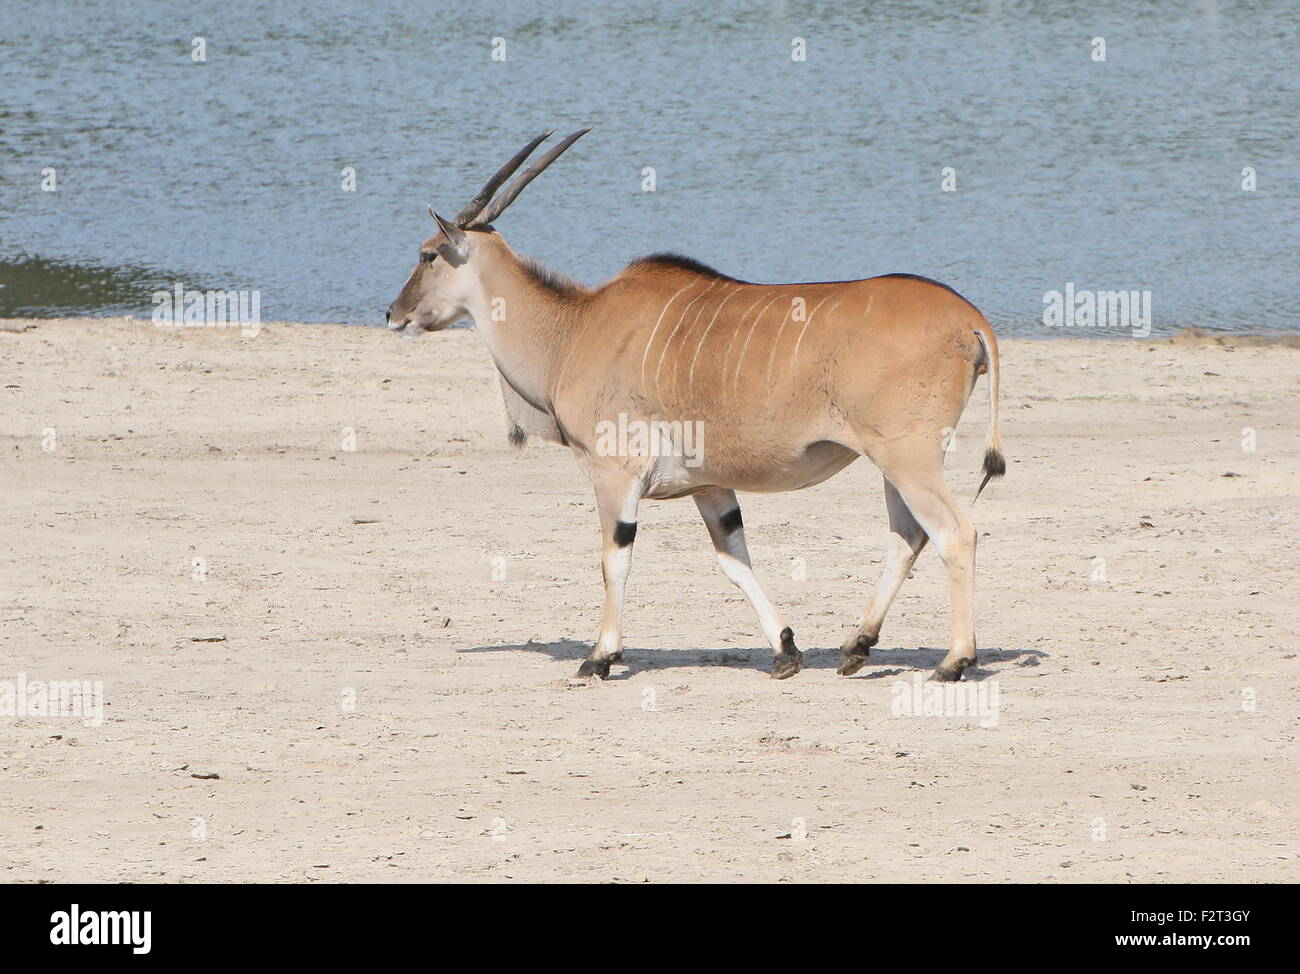 African Southern or Common Eland antelope (Taurotragus oryx) walking past a watering place Stock Photo